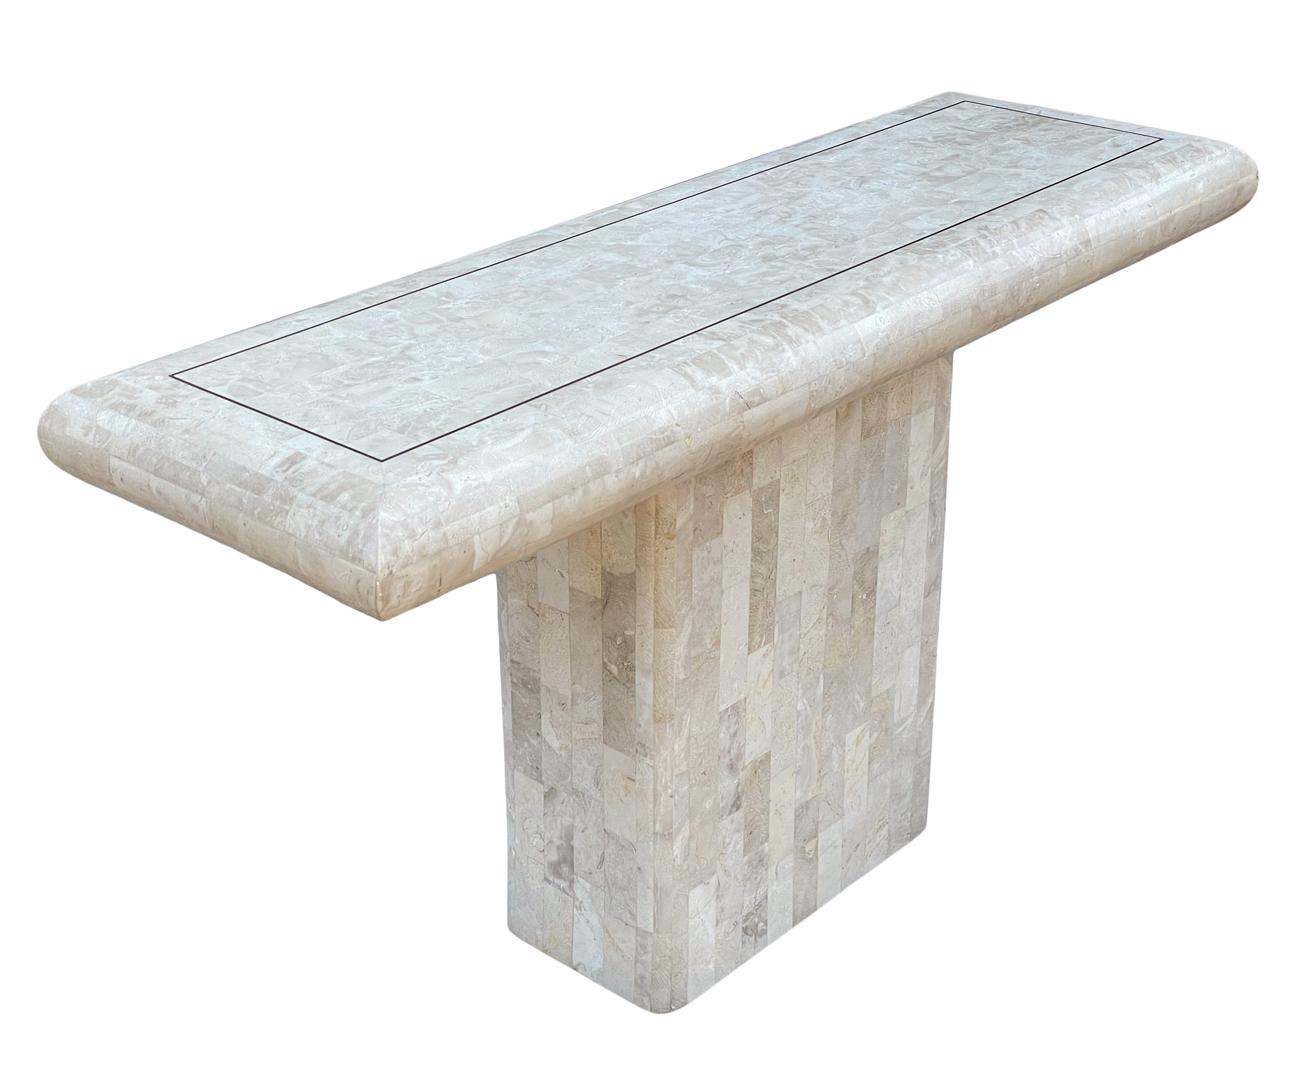 A vintage stone veneer console table from the 1980's. It features off white colored stone with inlayed brass detail.